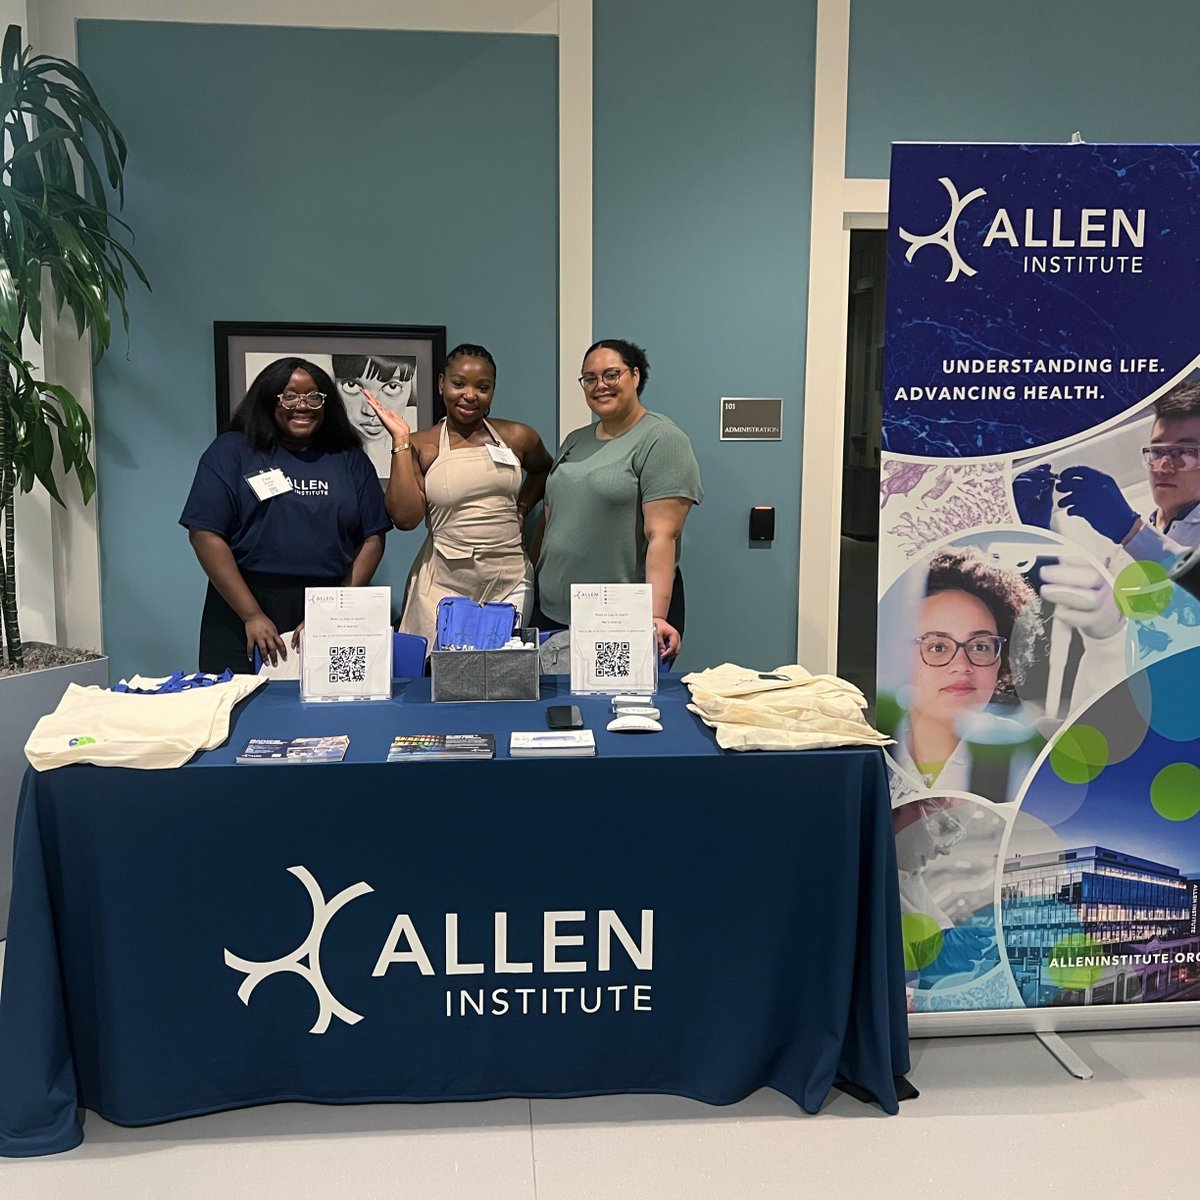 We're proud to be a sponsor of @SpelmanCollege's Research Day! Fese Elango, Olivia Unokesan, and Tyanna Stuckey are judging student scientific posters and sharing our research and opportunities. If you are on campus, swing by our table and say hello! #SpelmanResearchDay